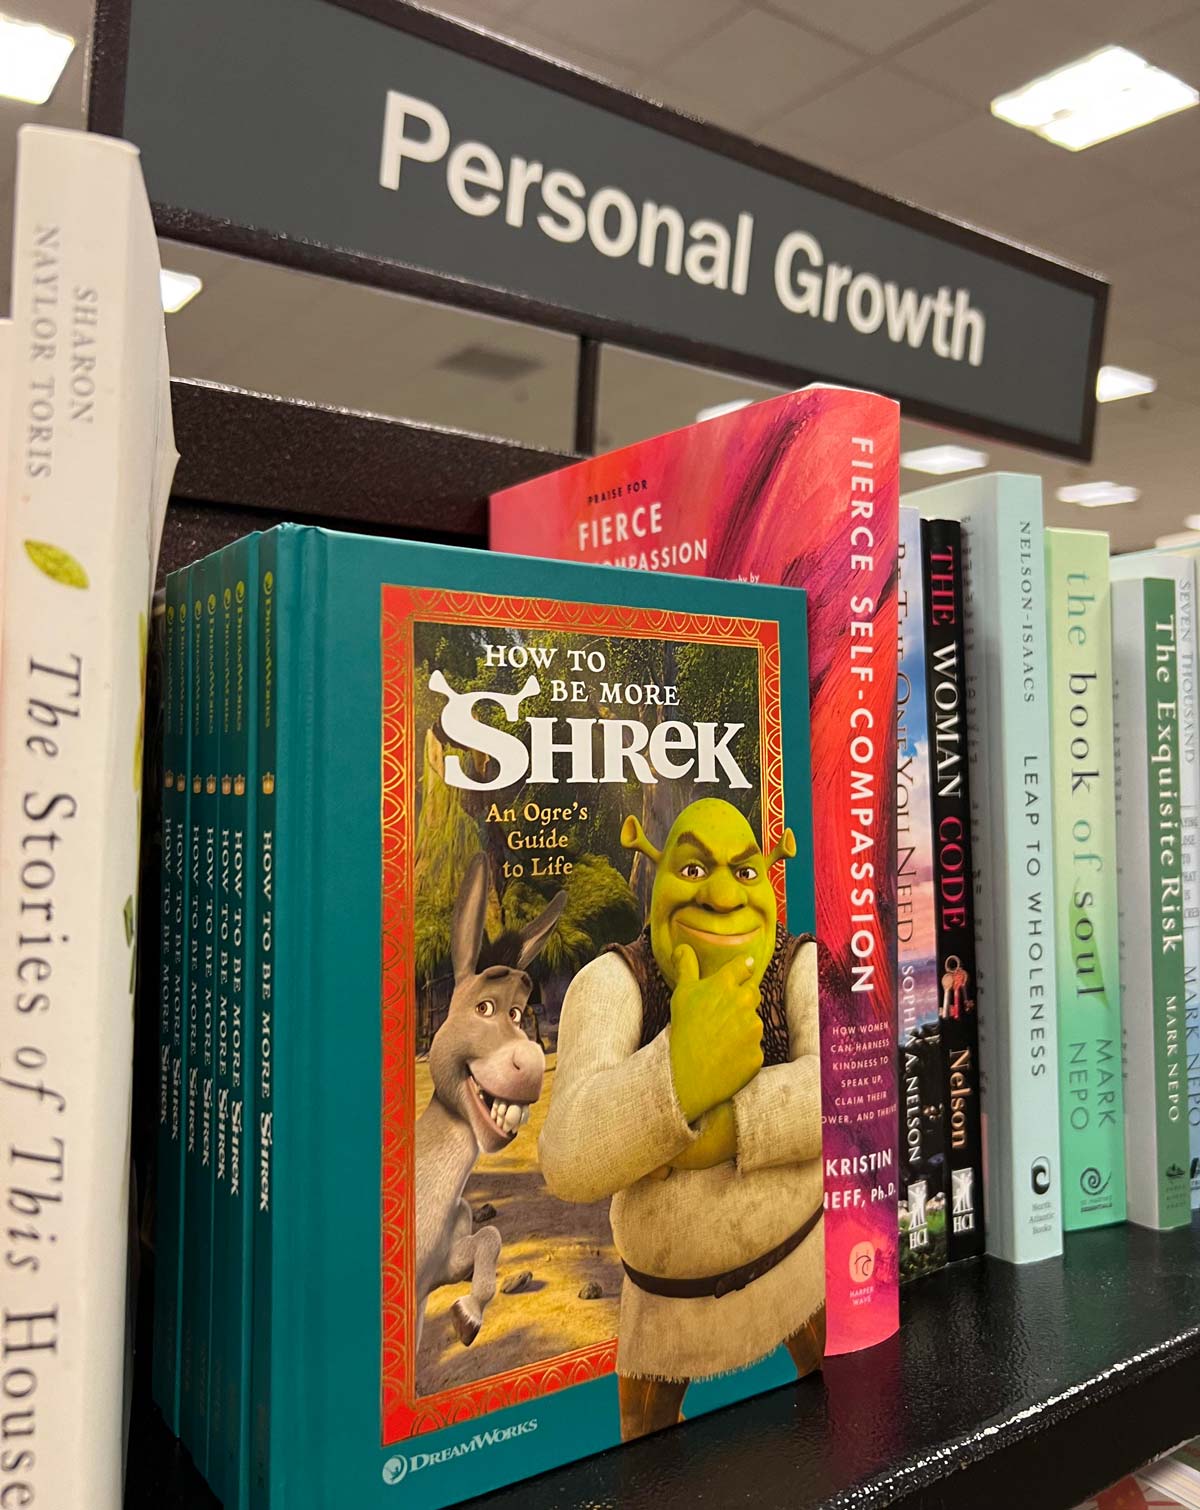 Saw this at my local bookstore